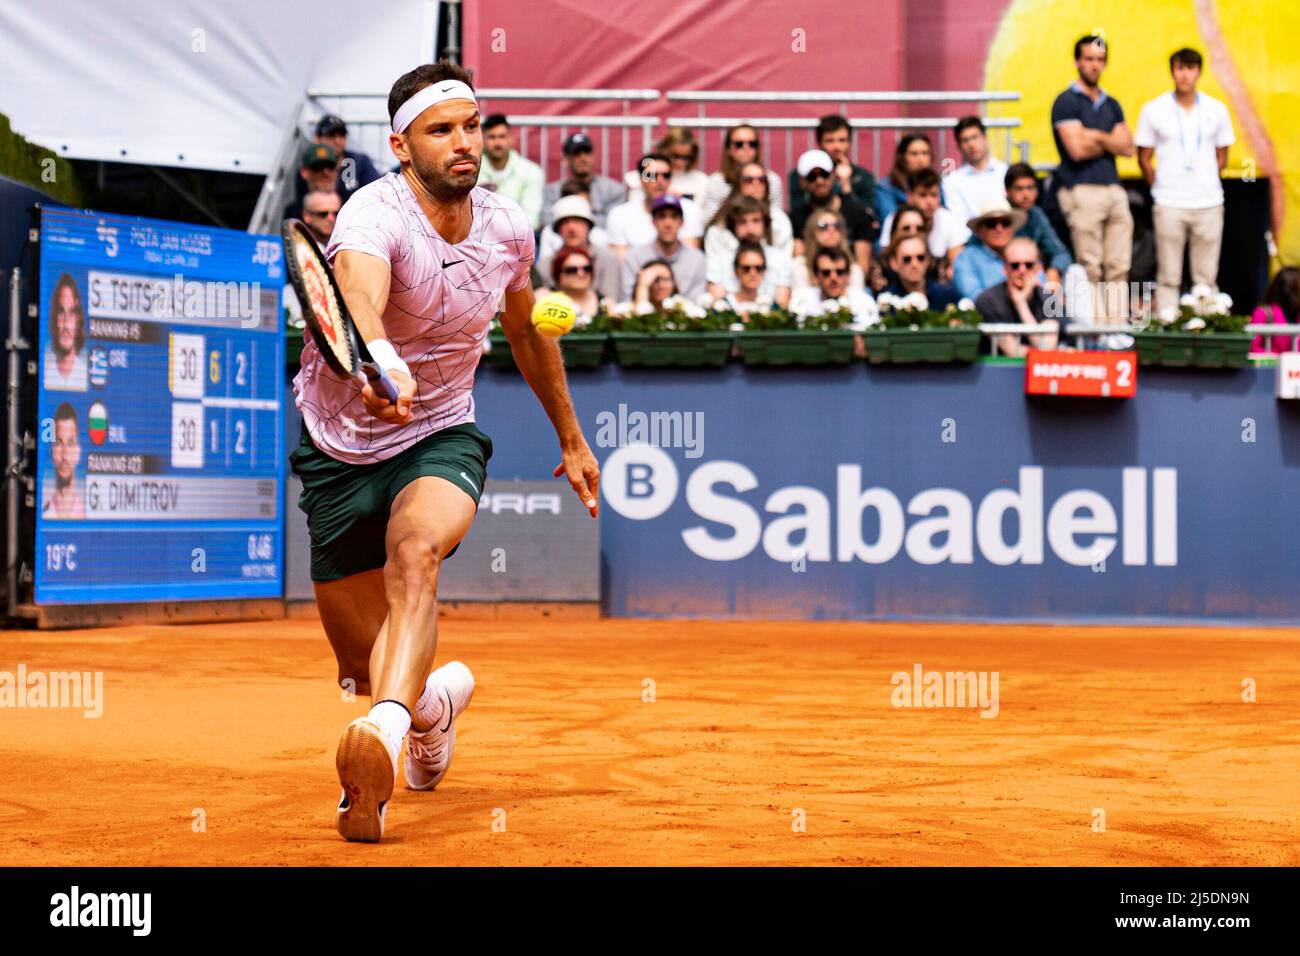 Barcelona, Spain. 22nd Apr, 2022. Grigor Dimitrov of Bulgaria in action  during the Barcelona Open Banc Sabadell at the Real Club de Tenis Barcelona  on April 22, 2022 in Barcelona, Spain. Foto: